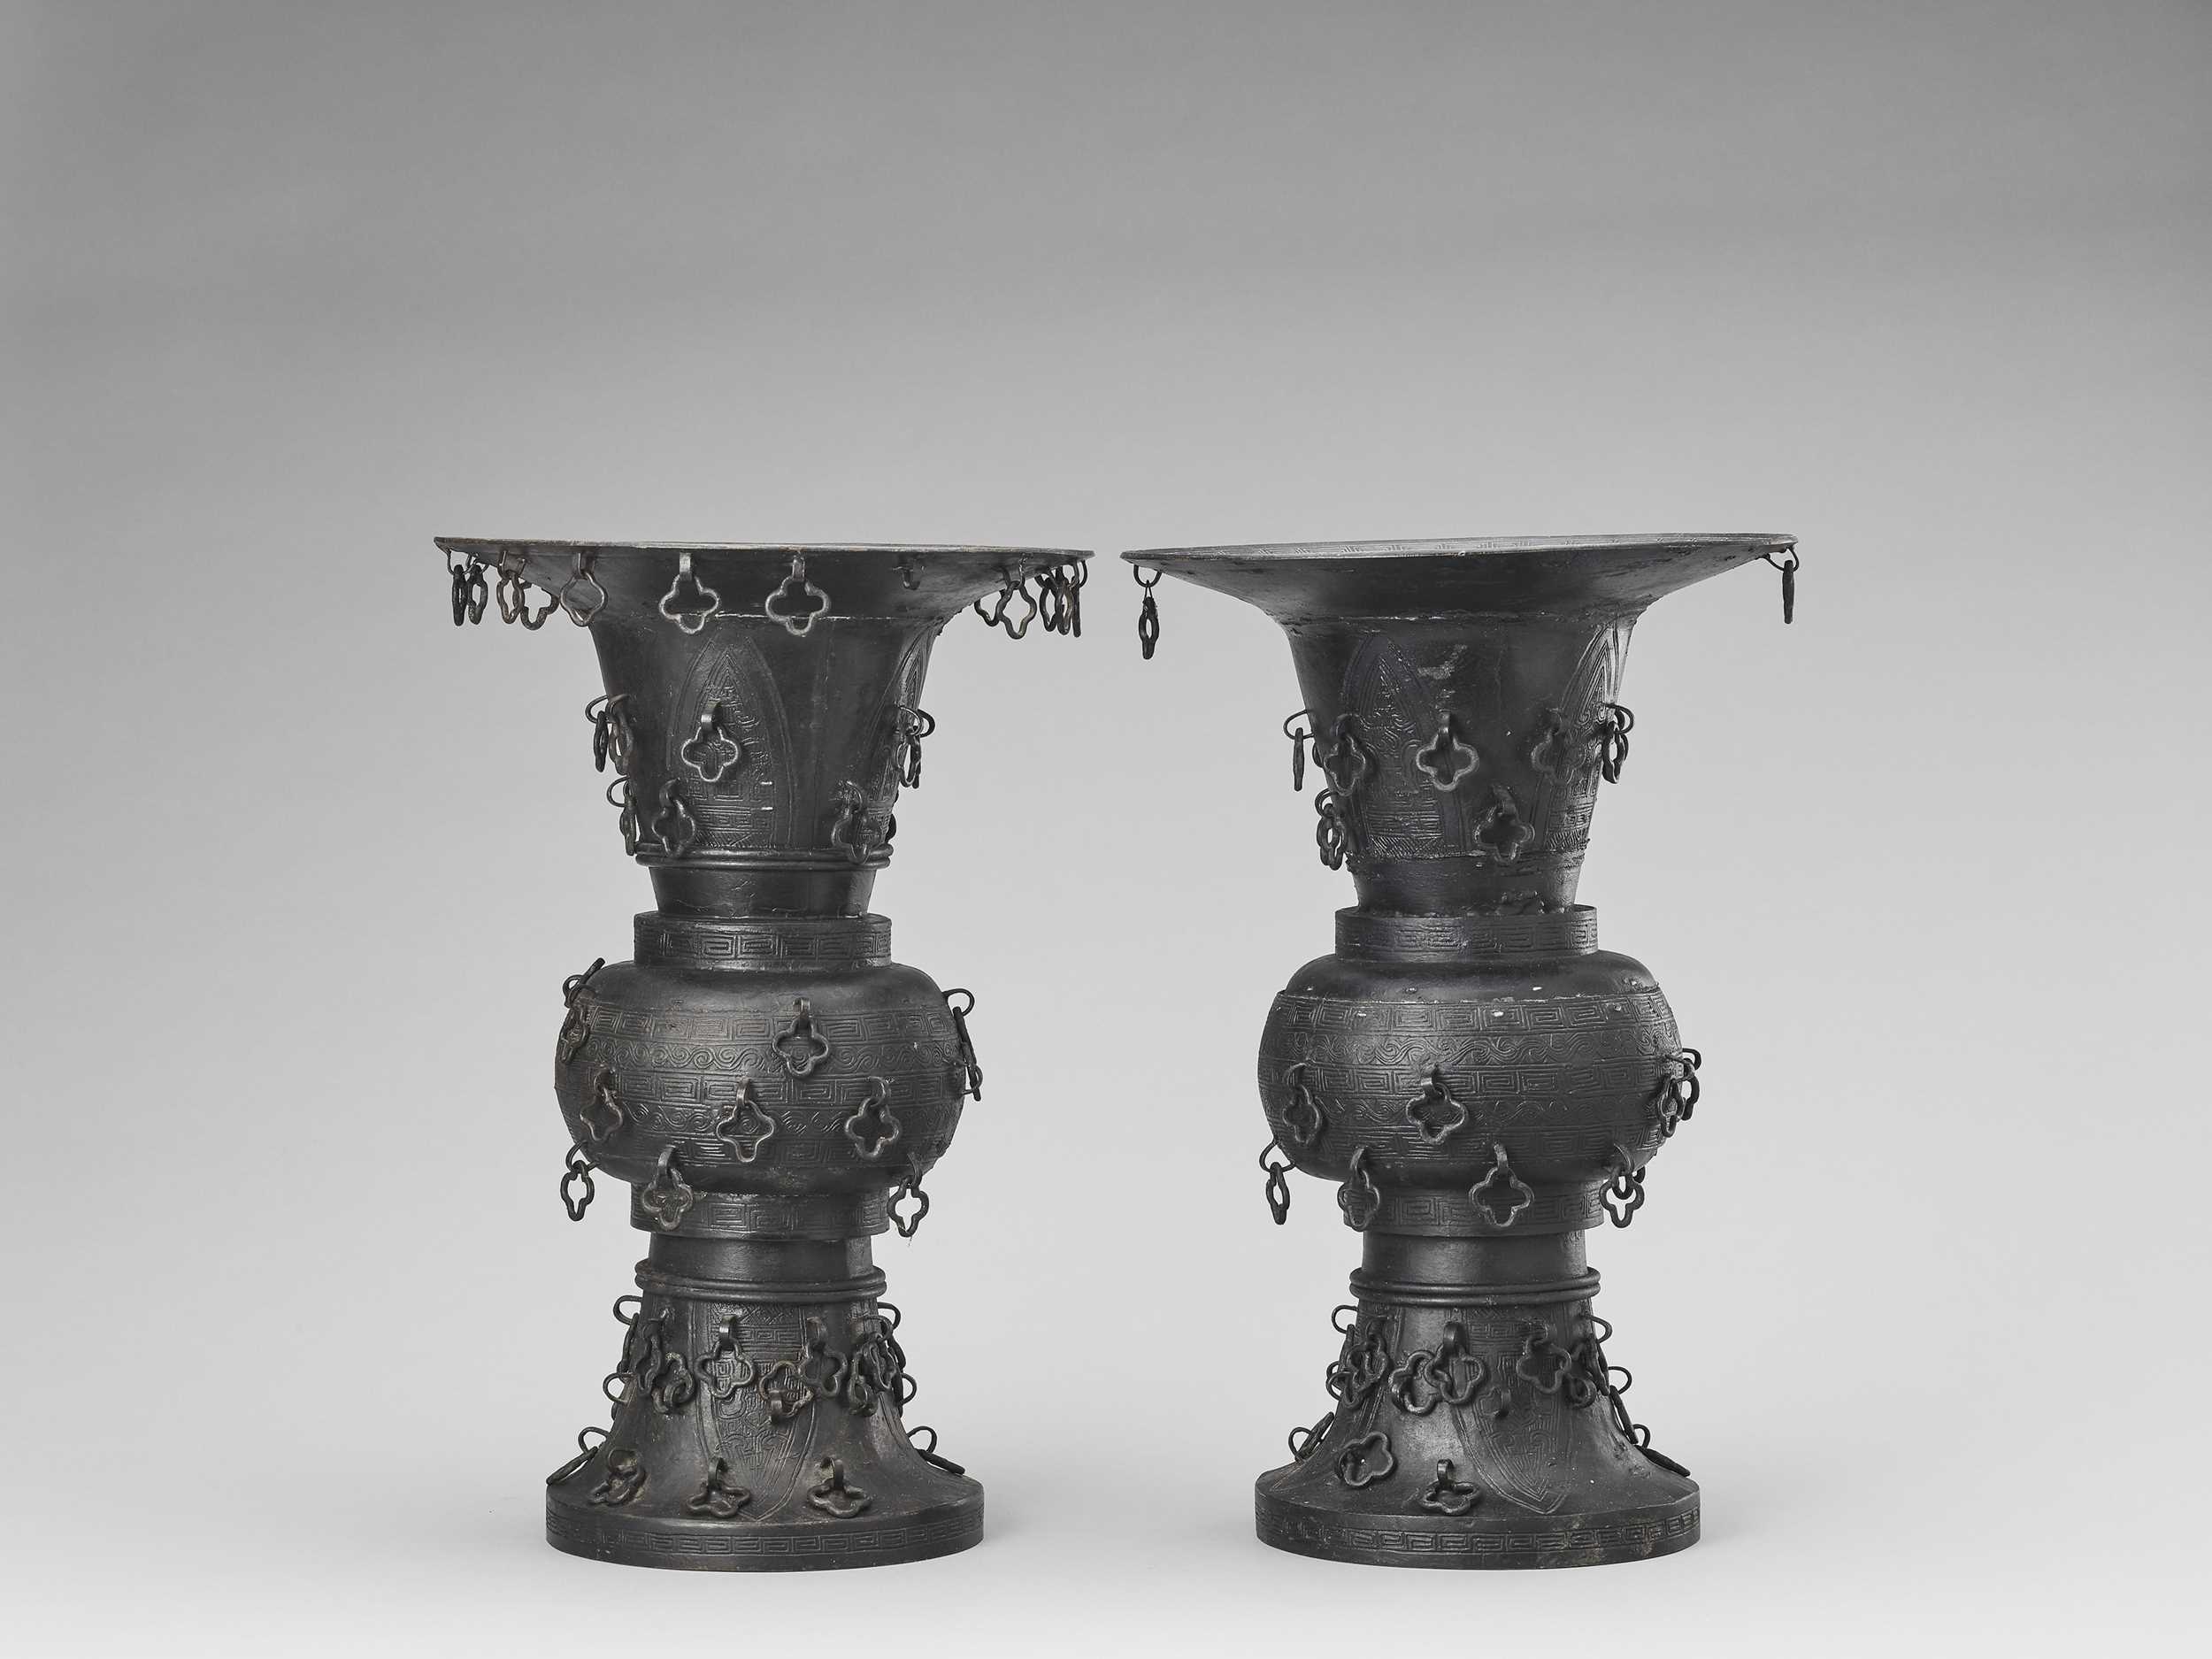 Lot 56 - A PAIR OF METAL ALLOY ARCHAISTIC YEN YEN VASES, LATE QING TO REPUBLIC